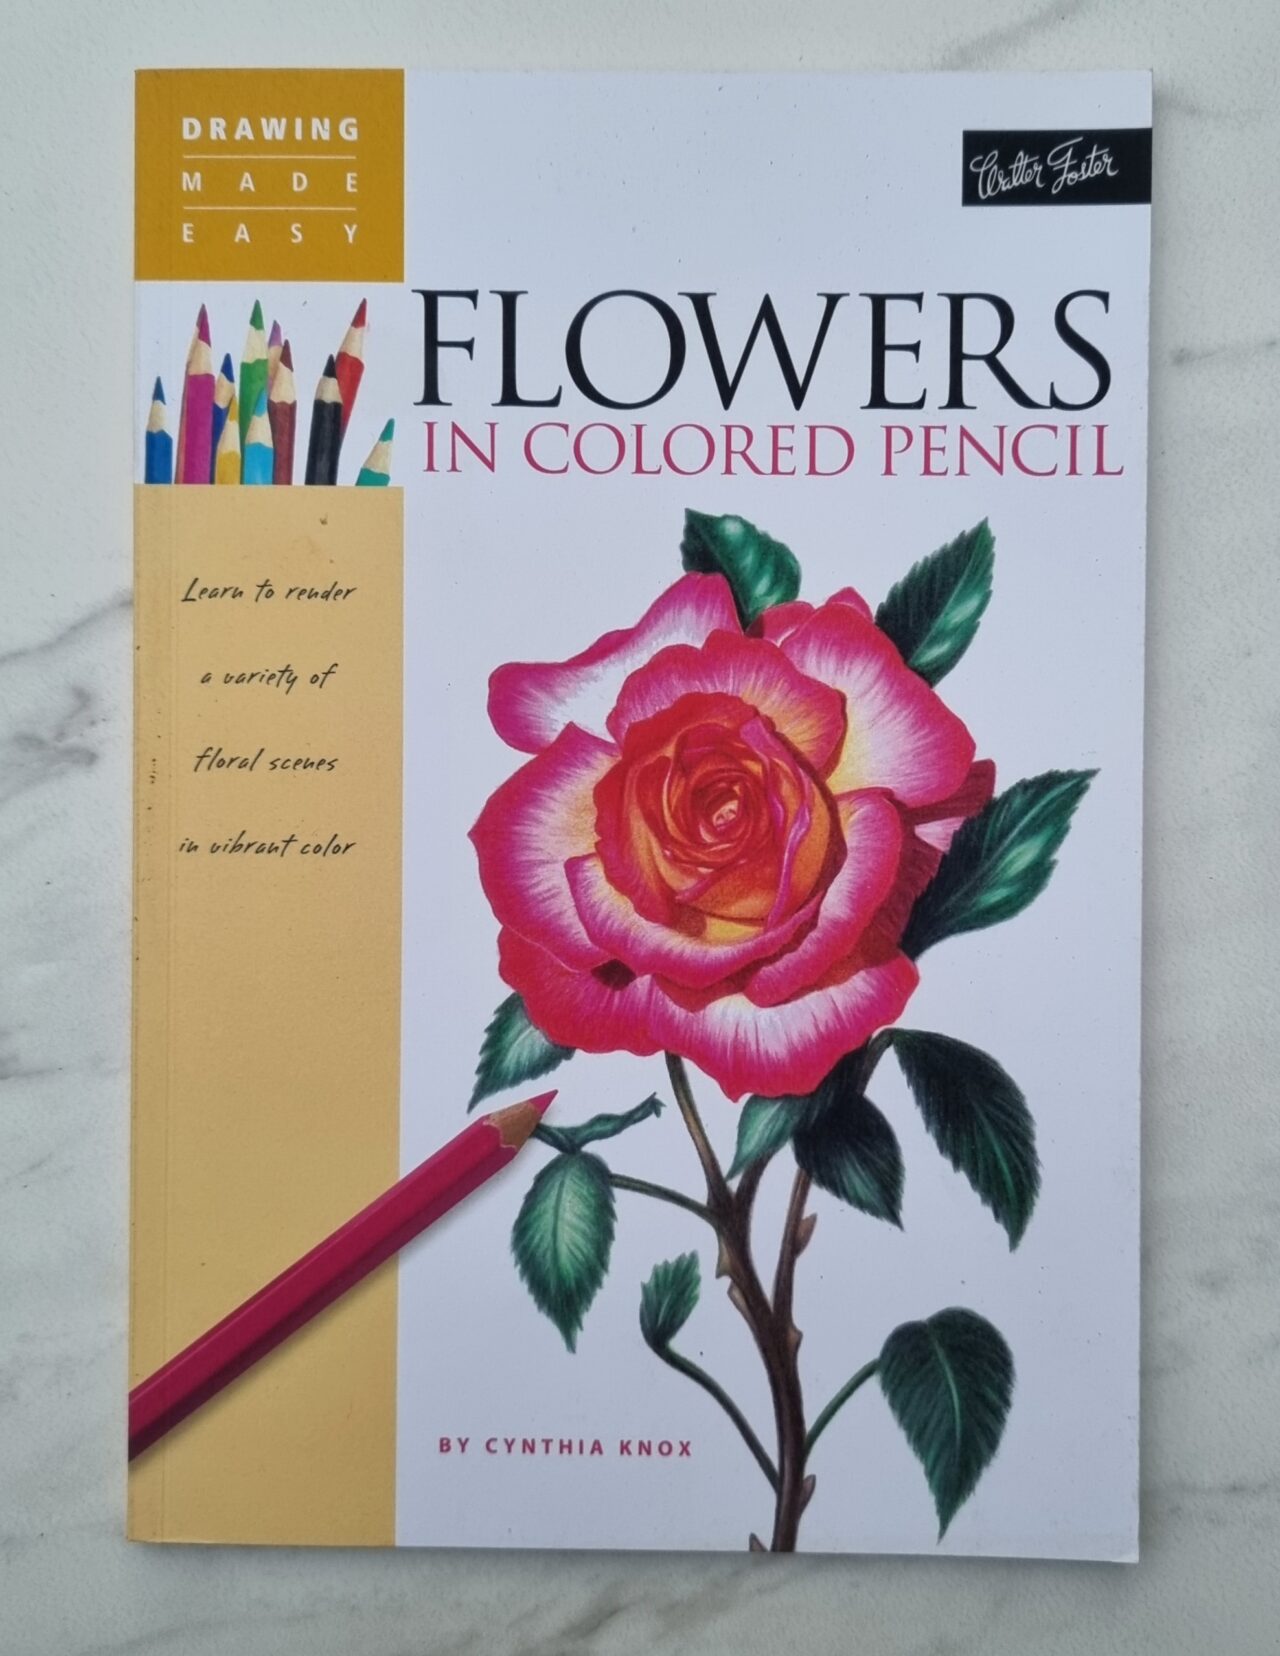 Flowers in colored pencils